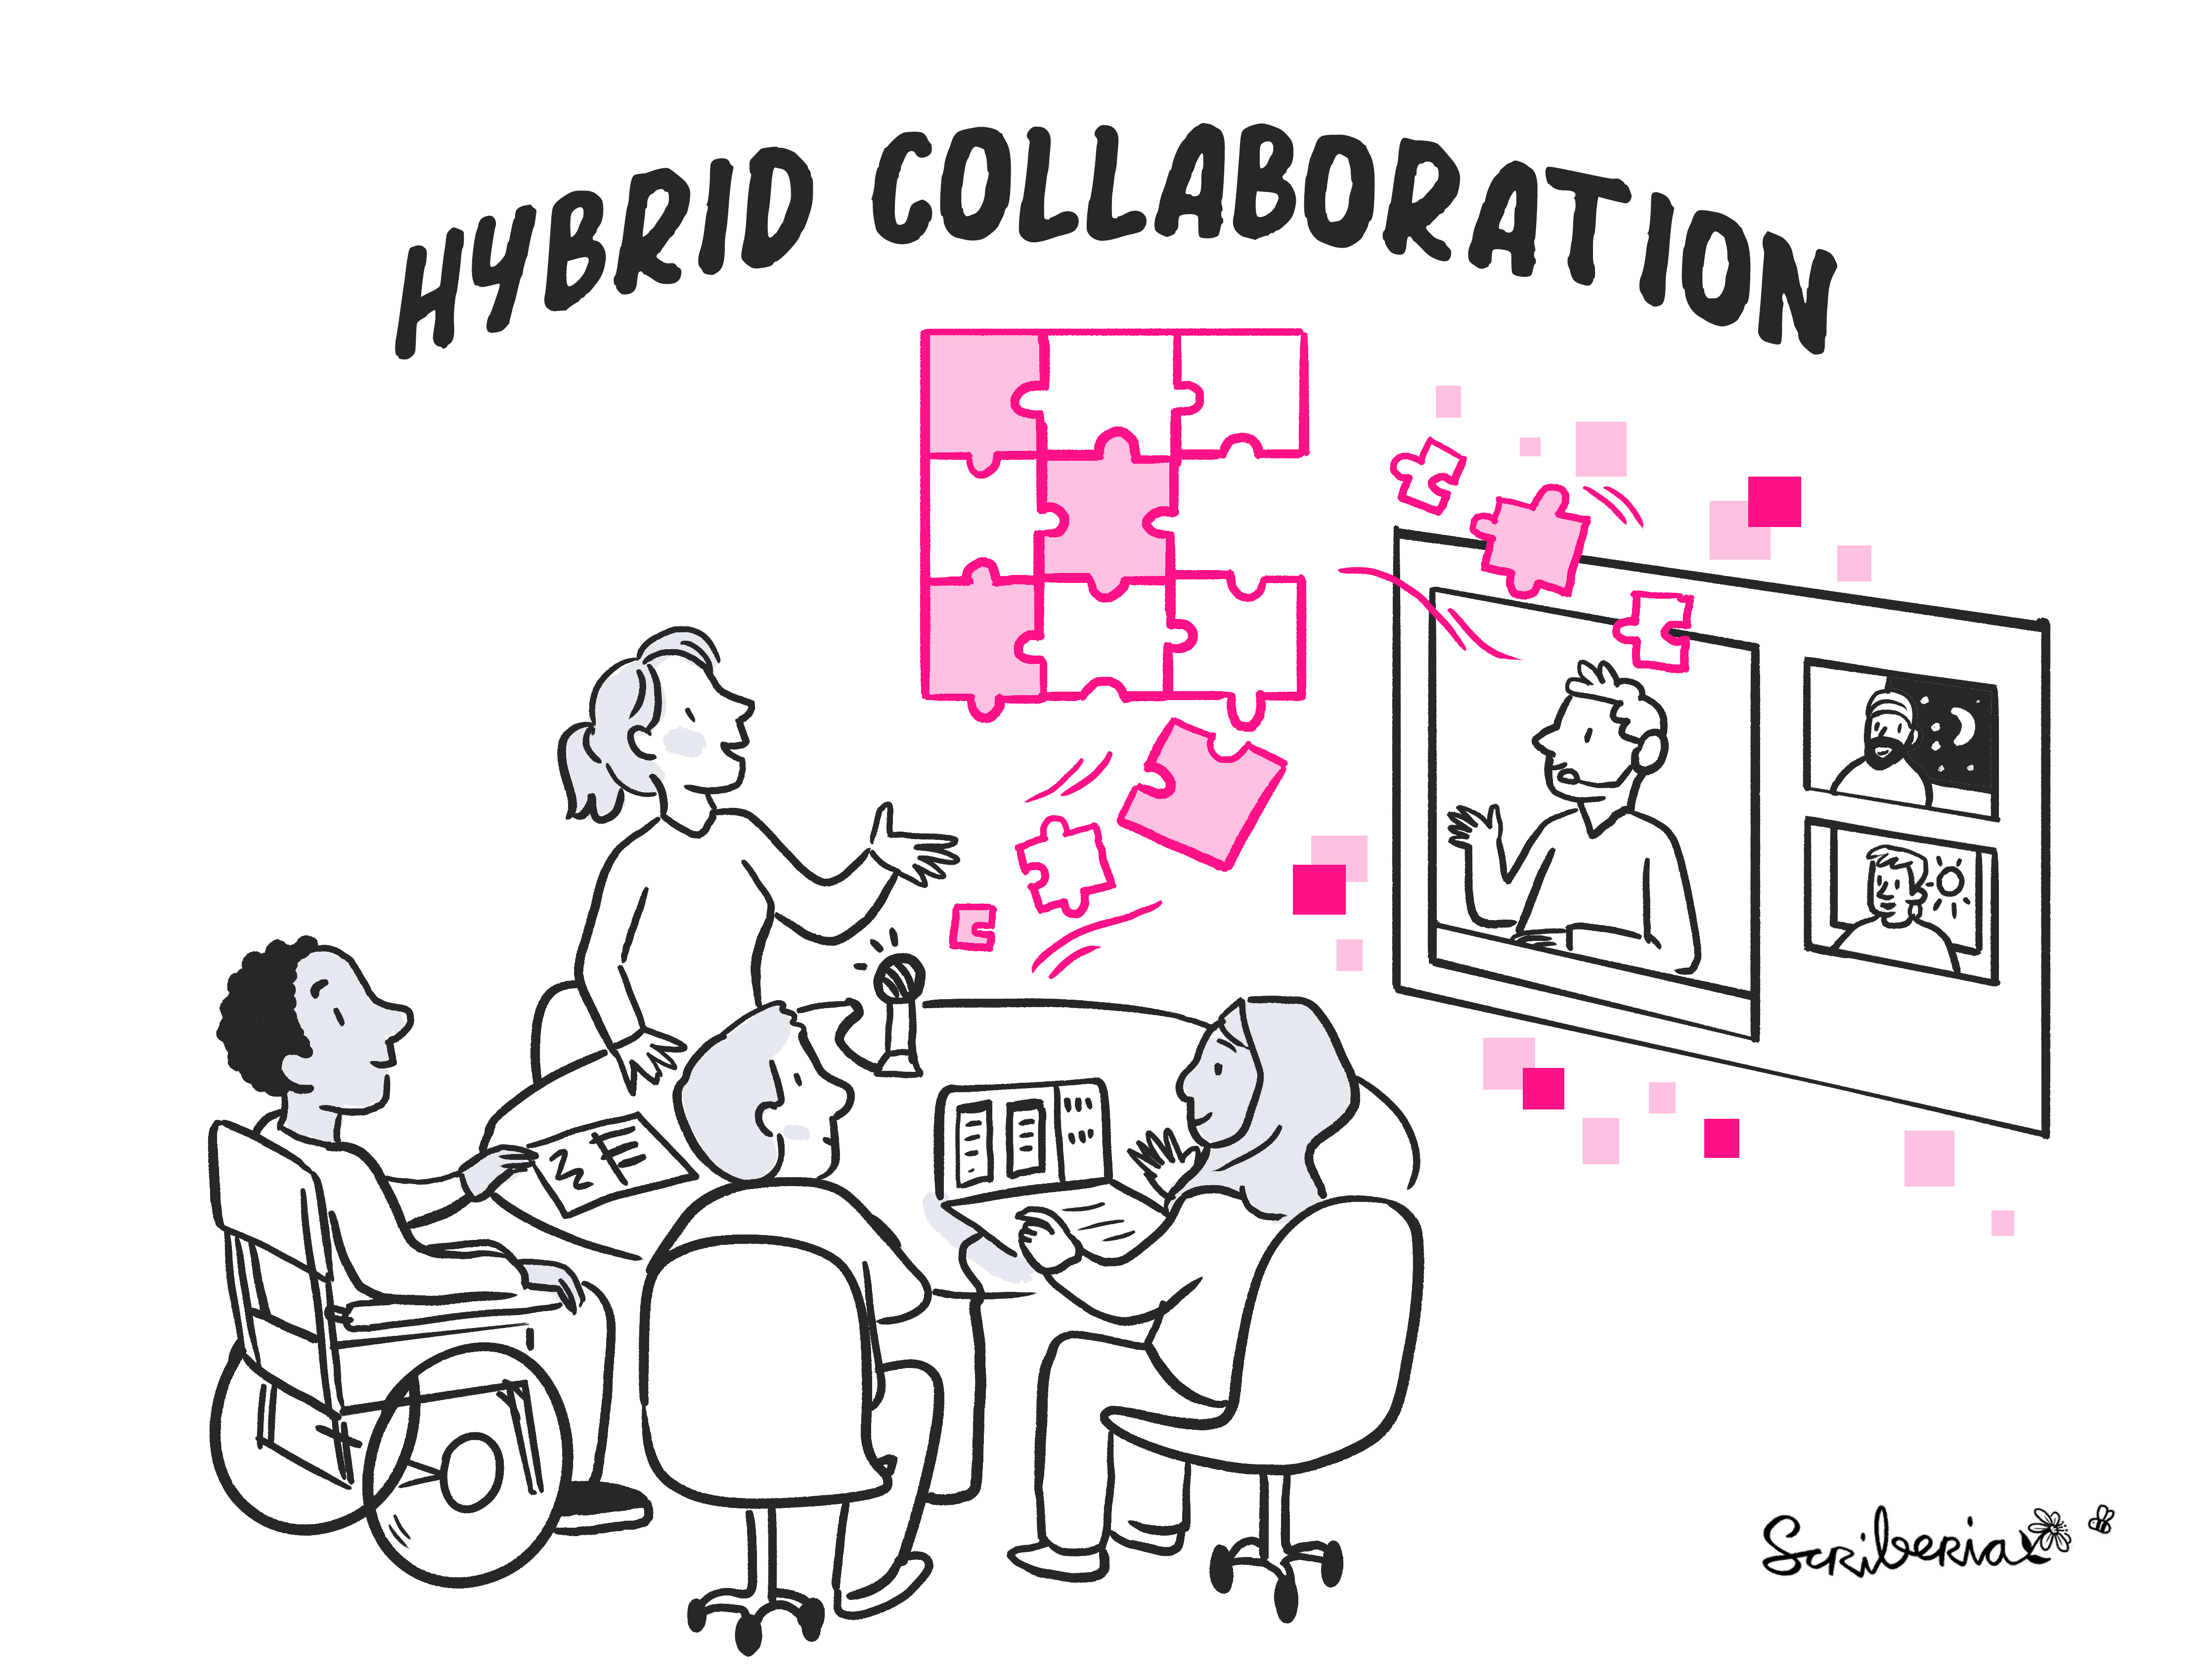 People are shown collaborating in a hybrid setting with facilitators, for both, those joining in-person and those joining remotely (from different time zones). All of them are collaborating and co-developing a shared document.